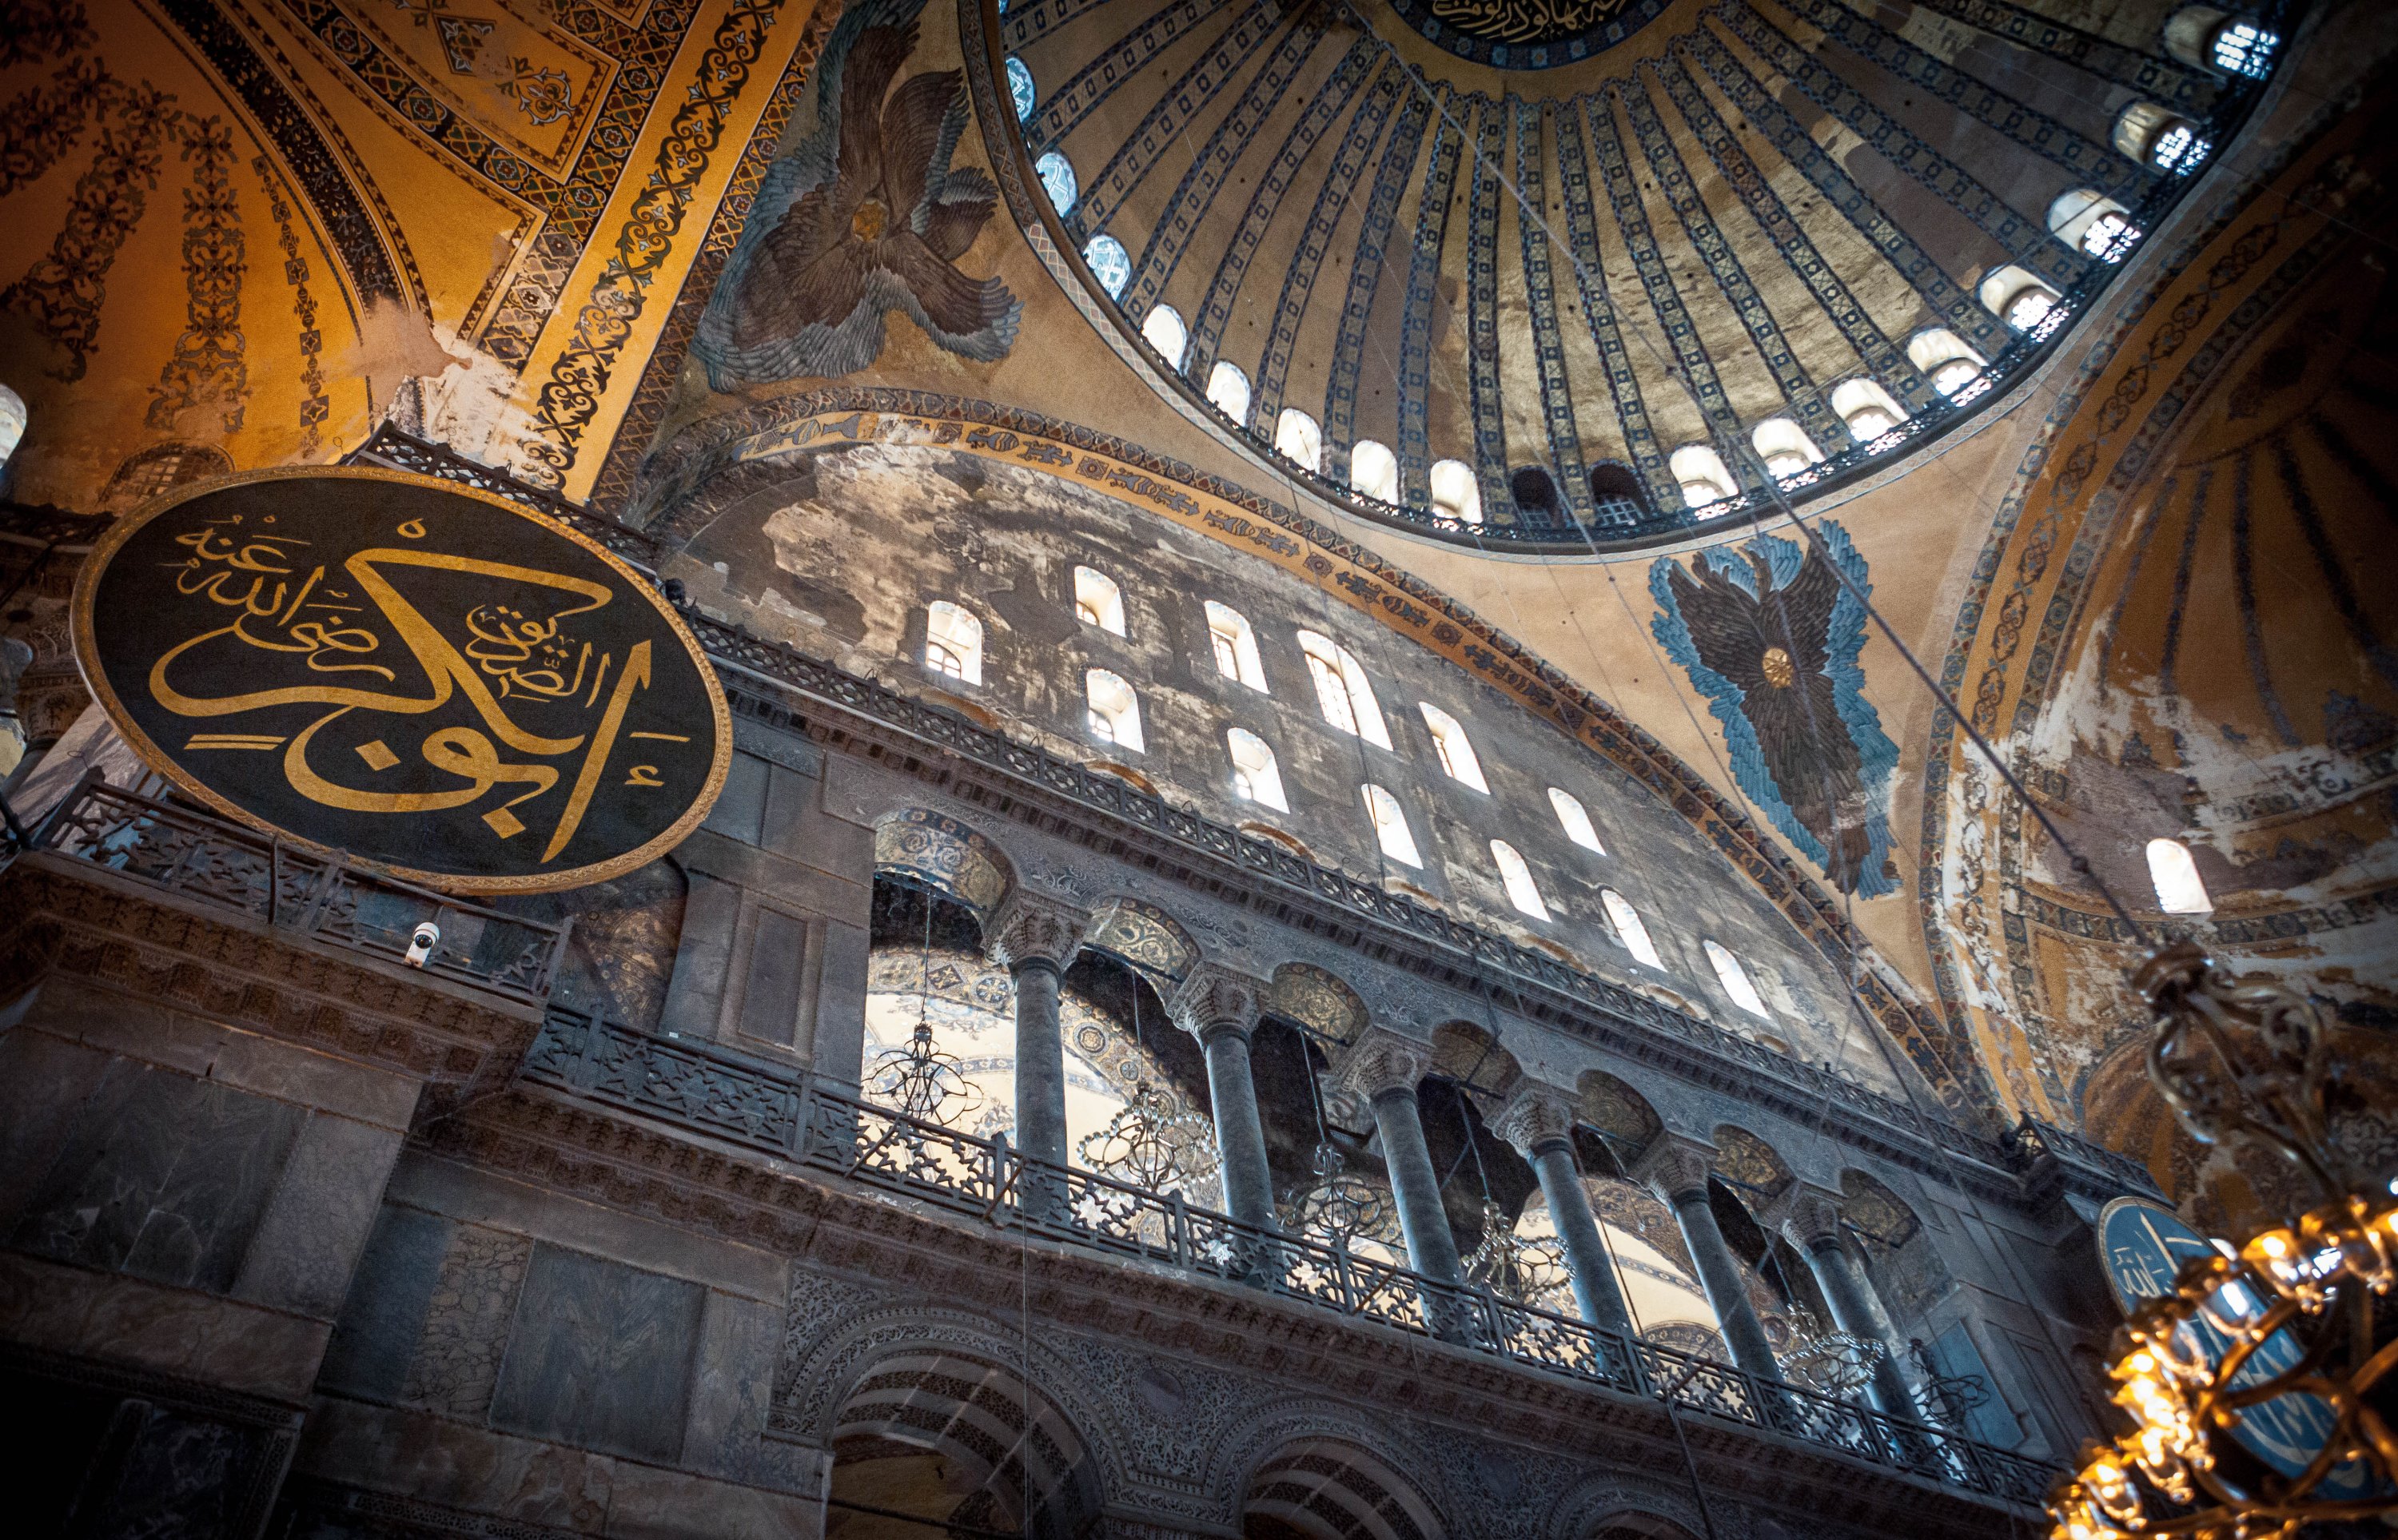 A photo from the interior of Hagia Sophia. (Photo by Hatice Çınar)